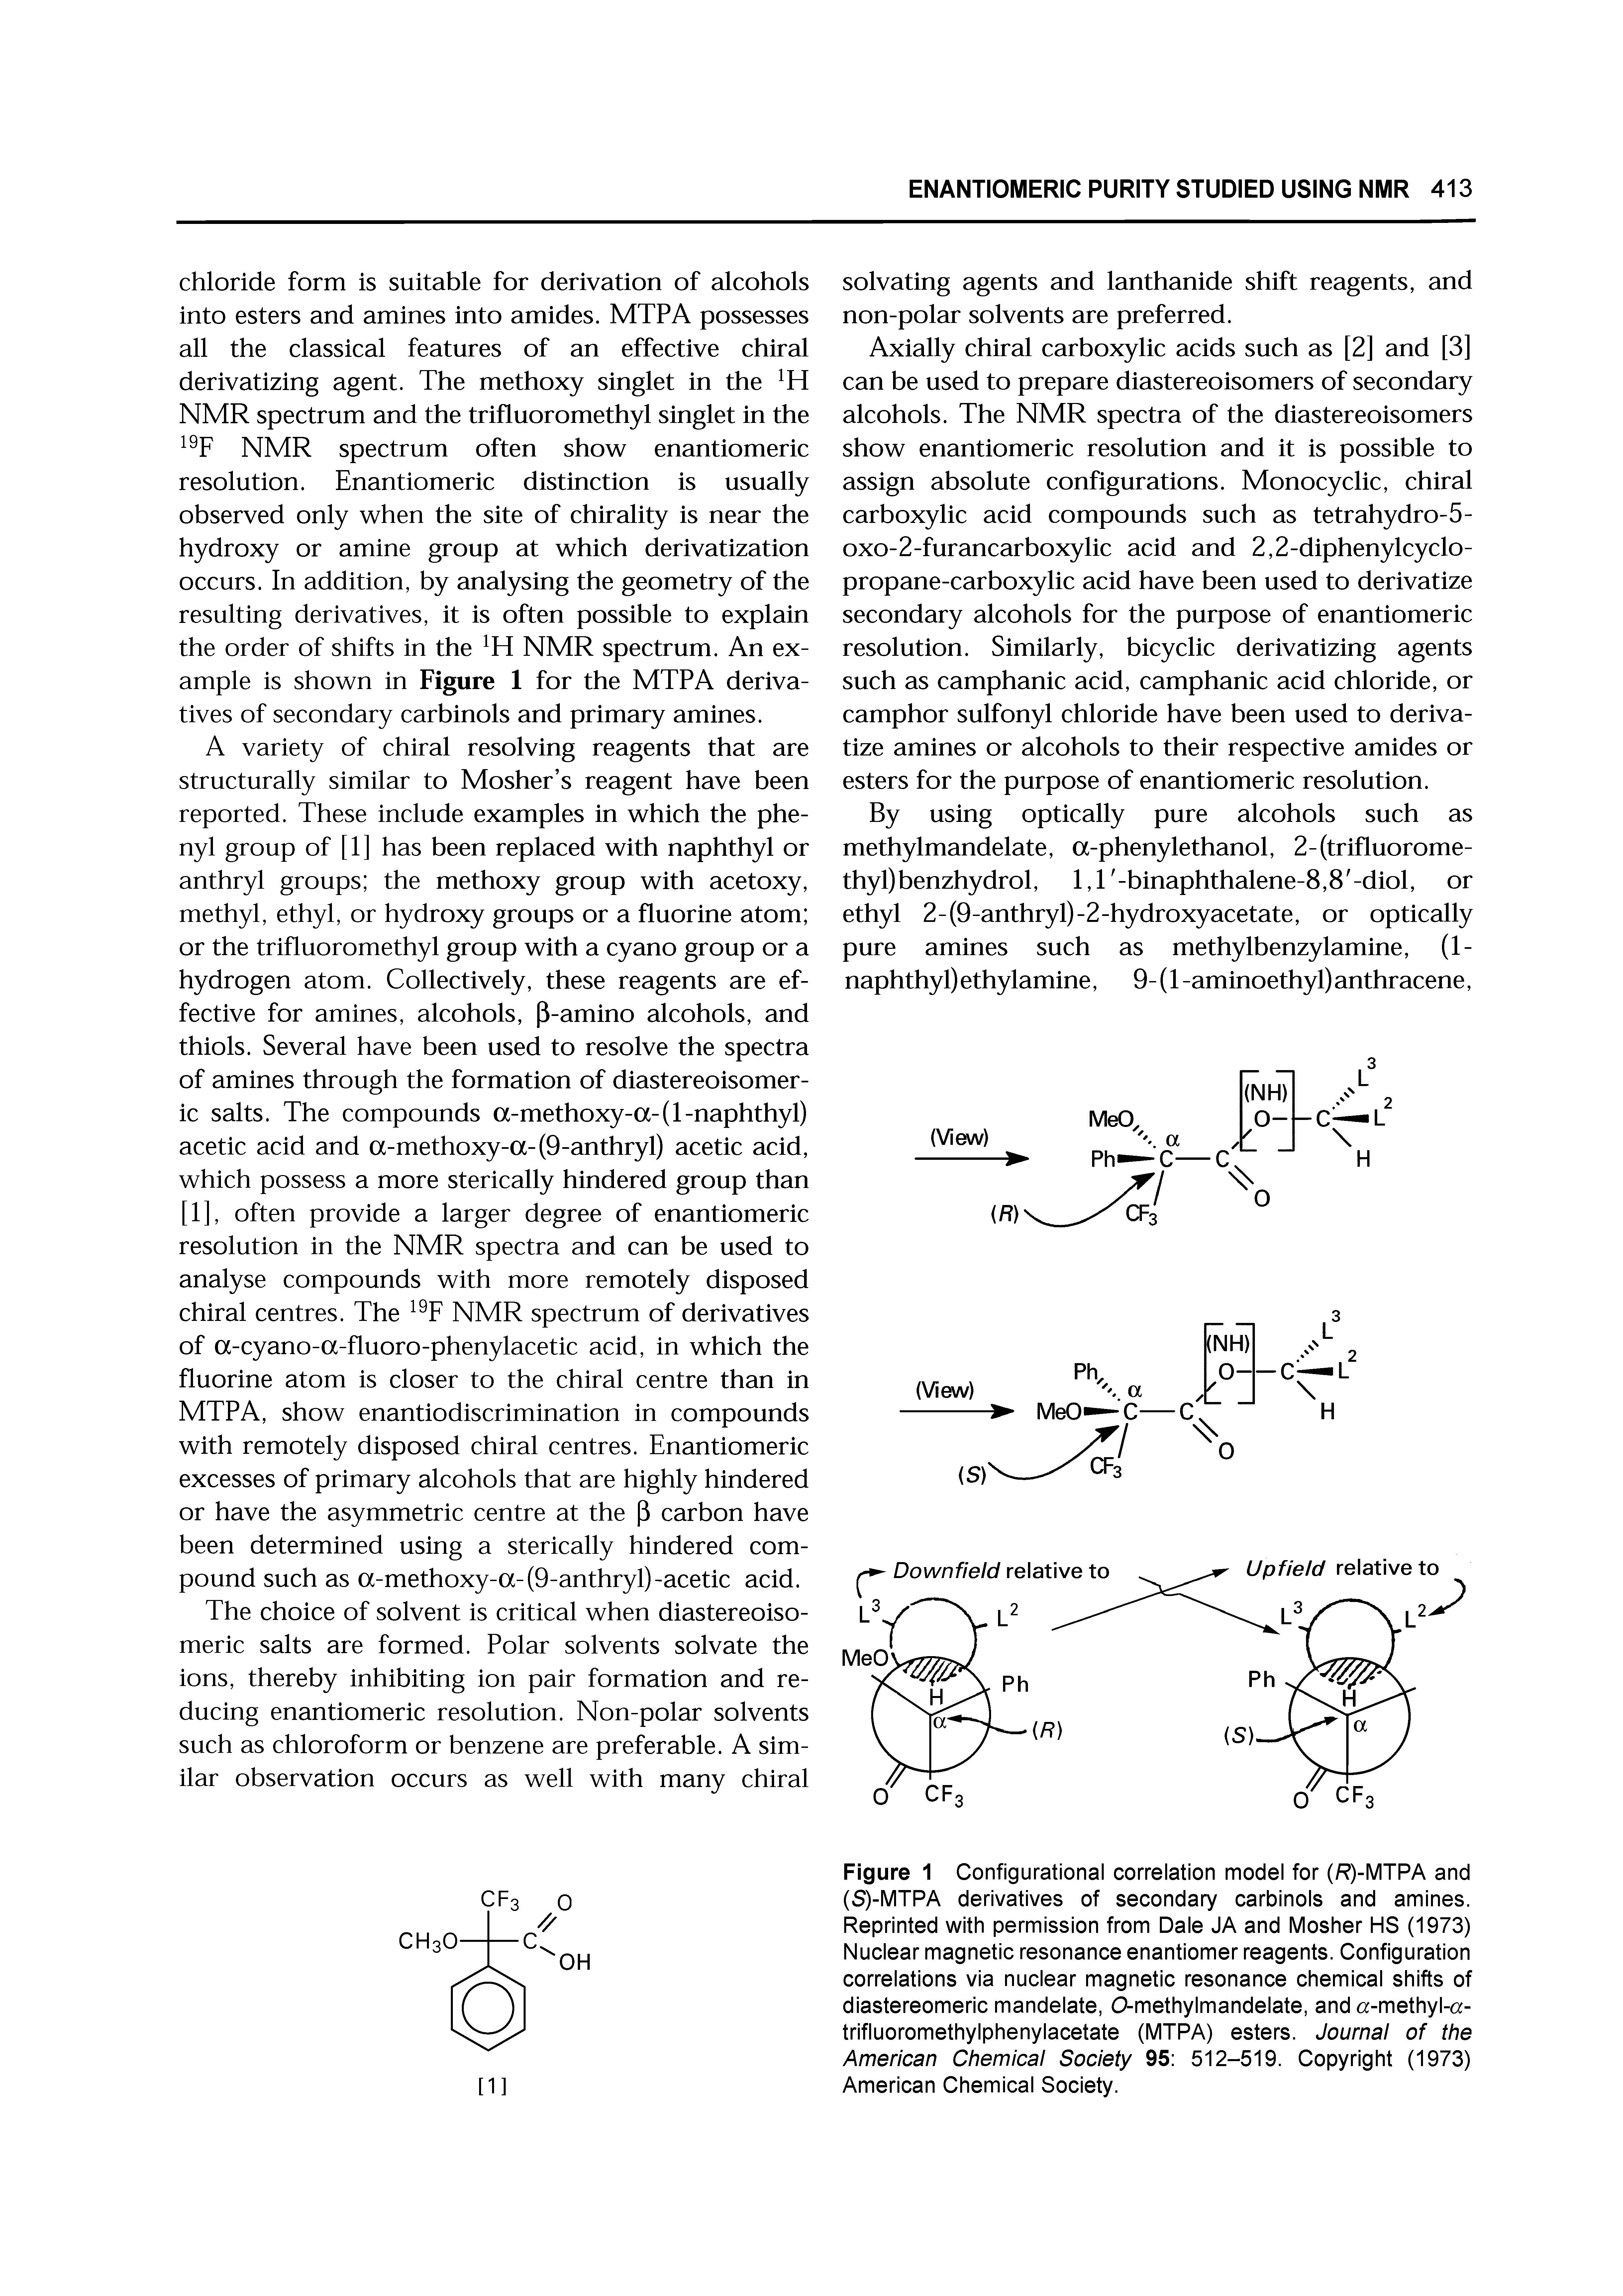 Figure 1 Configurational correlation model for (/ )-MTPA and (S)-MTPA derivatives of secondary carbinols and amines. Reprinted with permission from Dale JA and Mosher HS (1973) Nuclear magnetic resonance enantiomer reagents. Configuration correlations via nuclear magnetic resonance chemical shifts of diastereomeric mandelate, 0-methylmandelate, and a-methyl-a-trifluoromethylphenylacetate (MTPA) esters. Journal of the American Chemical Society 95 512-519. Copyright (1973) American Chemical Society.